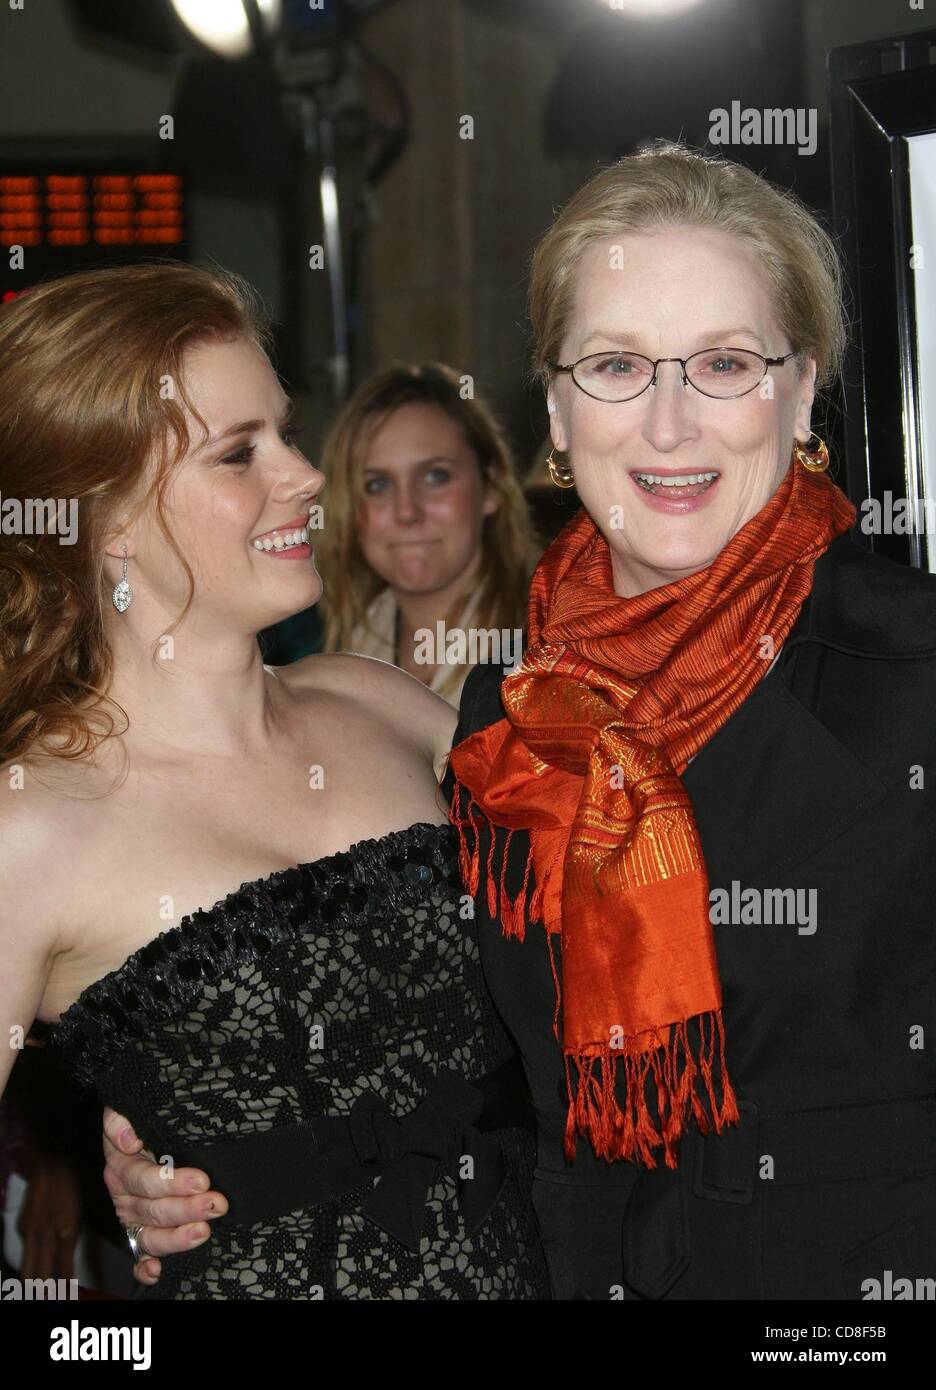 Oct 30, 2008 - Los Angeles, California, USA - Actress AMY ADAMS and Actress MERYL STREEP  at the The 2008 AFI Fest Opening Night Premiere 'Doubt' held at the Arclight Hollywood. (Credit Image: Â© Paul Fenton/ZUMA Press) Stock Photo